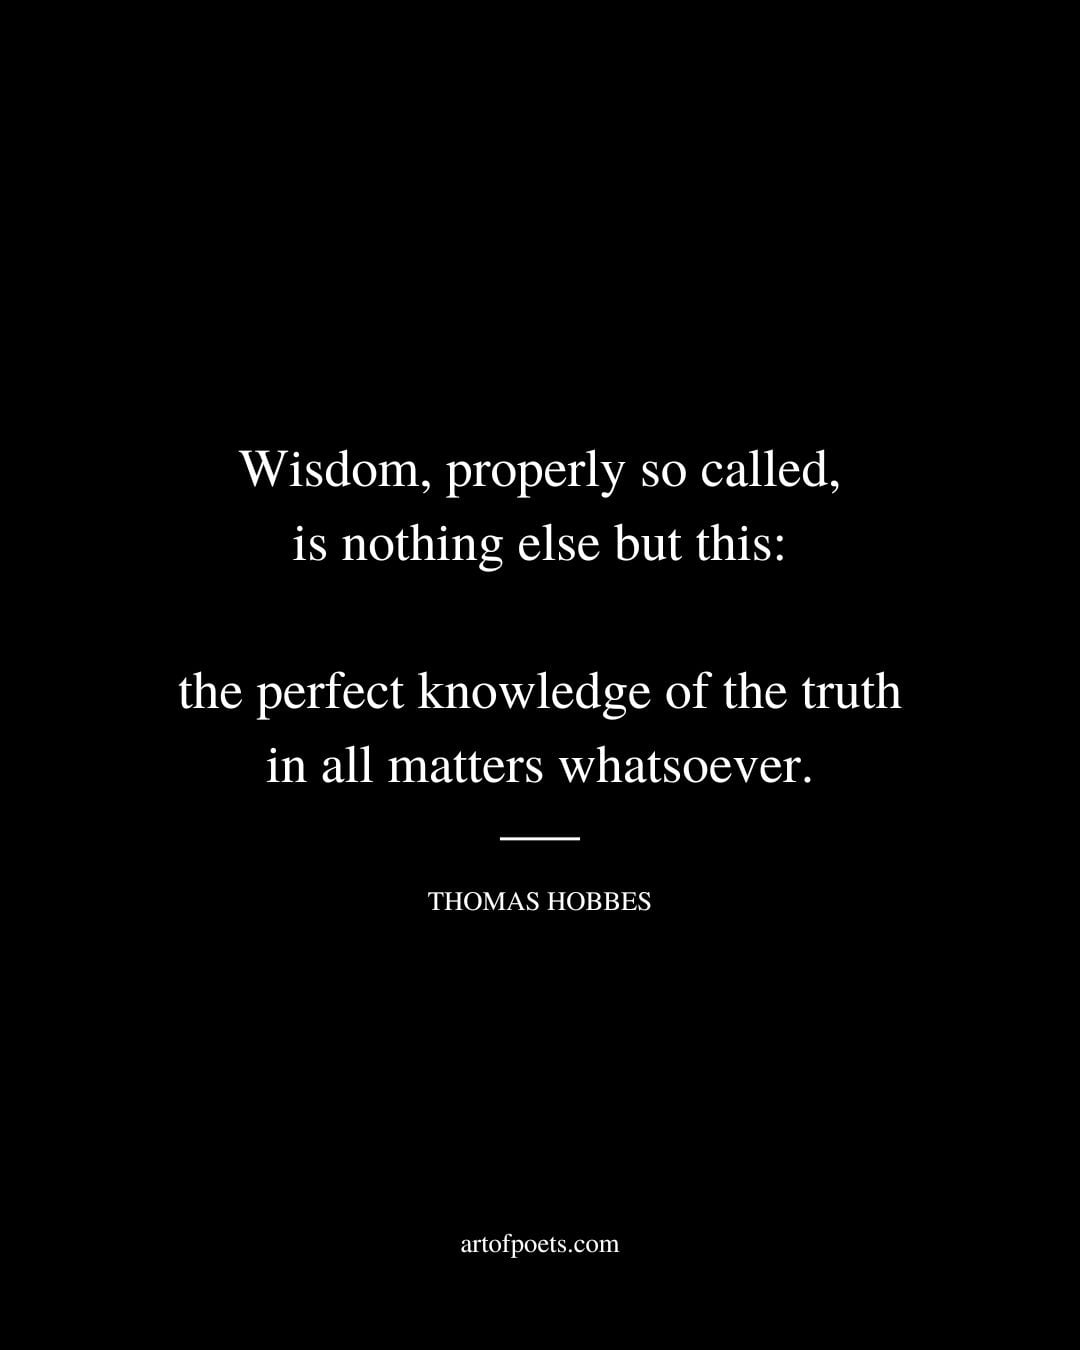 Wisdom properly so called is nothing else but this the perfect knowledge of the truth in all matters whatsoever